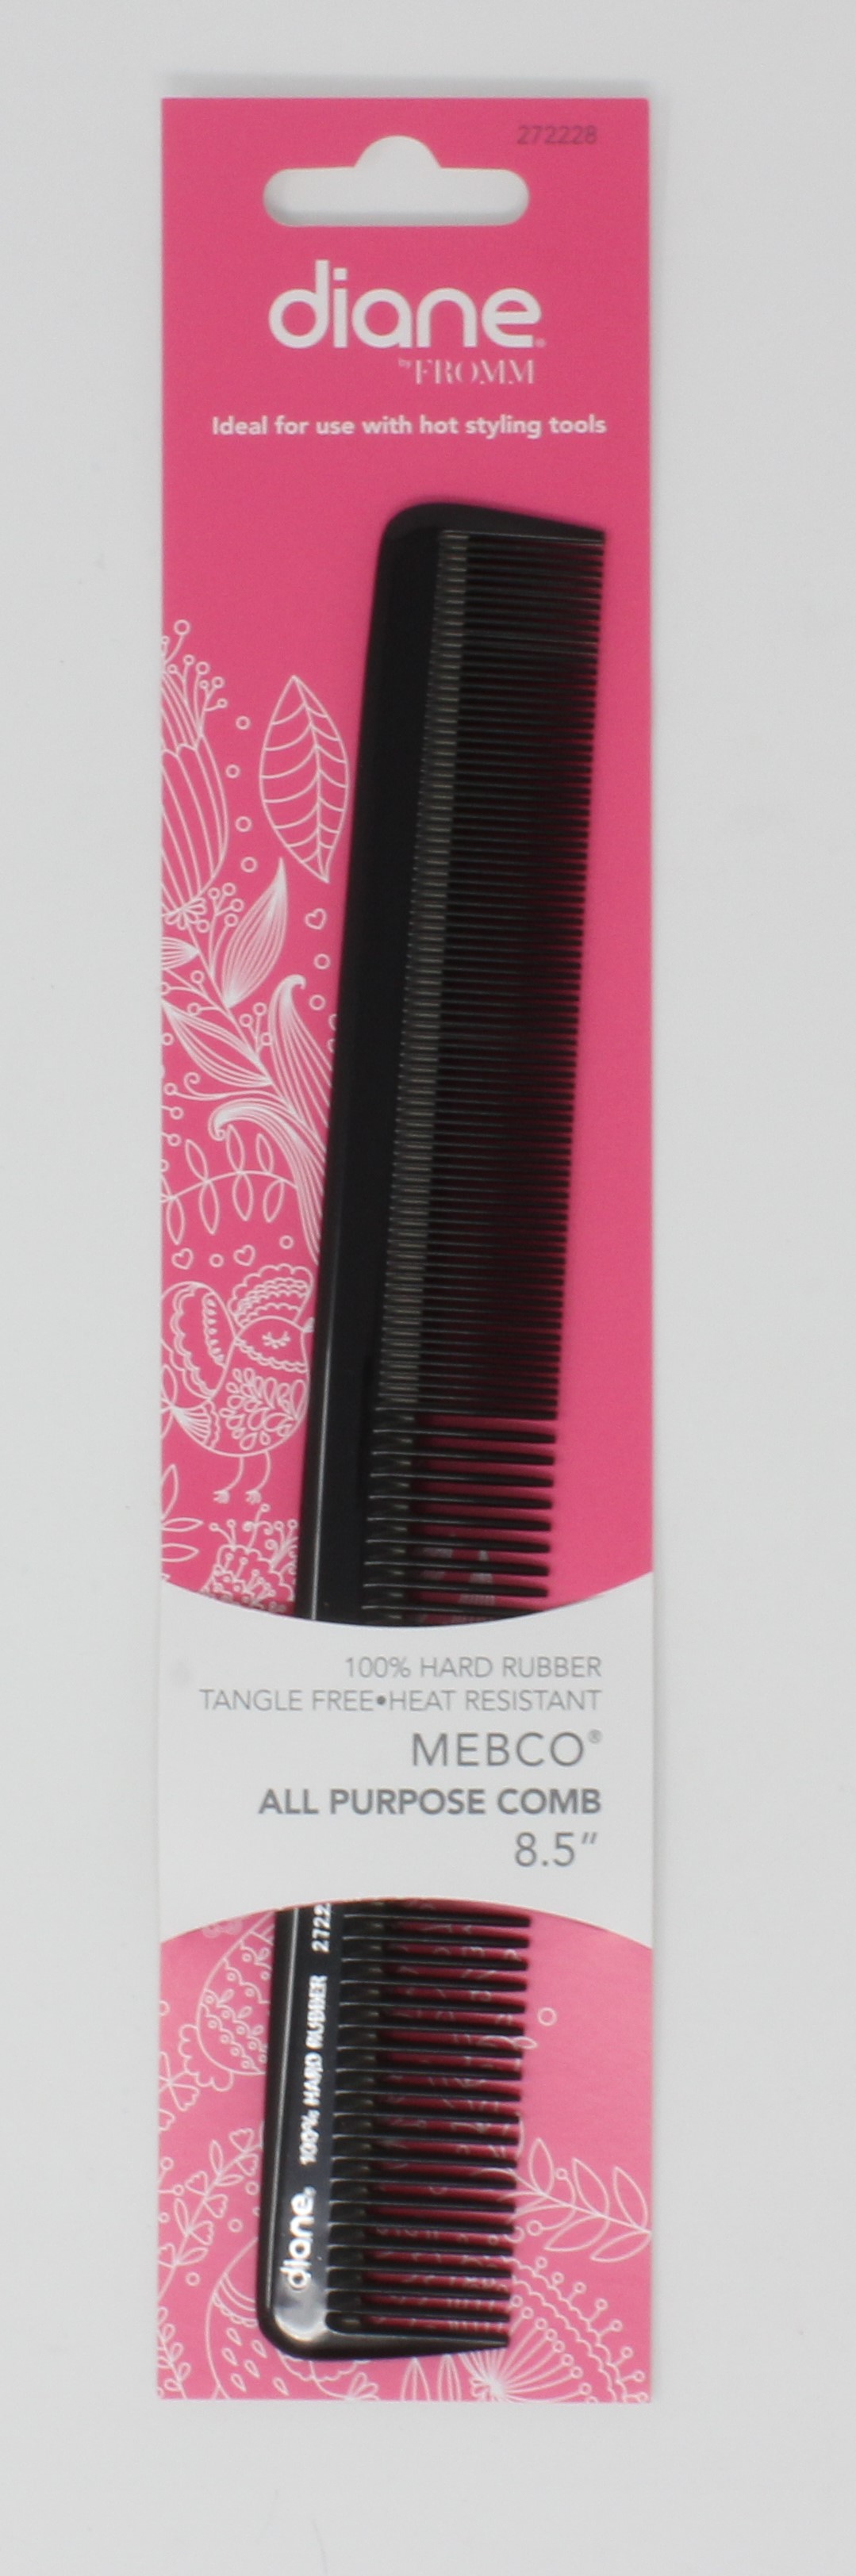 DIANE 100% HARD RUBBER TANGLE FREE AND HEAT RESISTANT MEBCO ALL PURPOSE COMB UPC # 023508001409